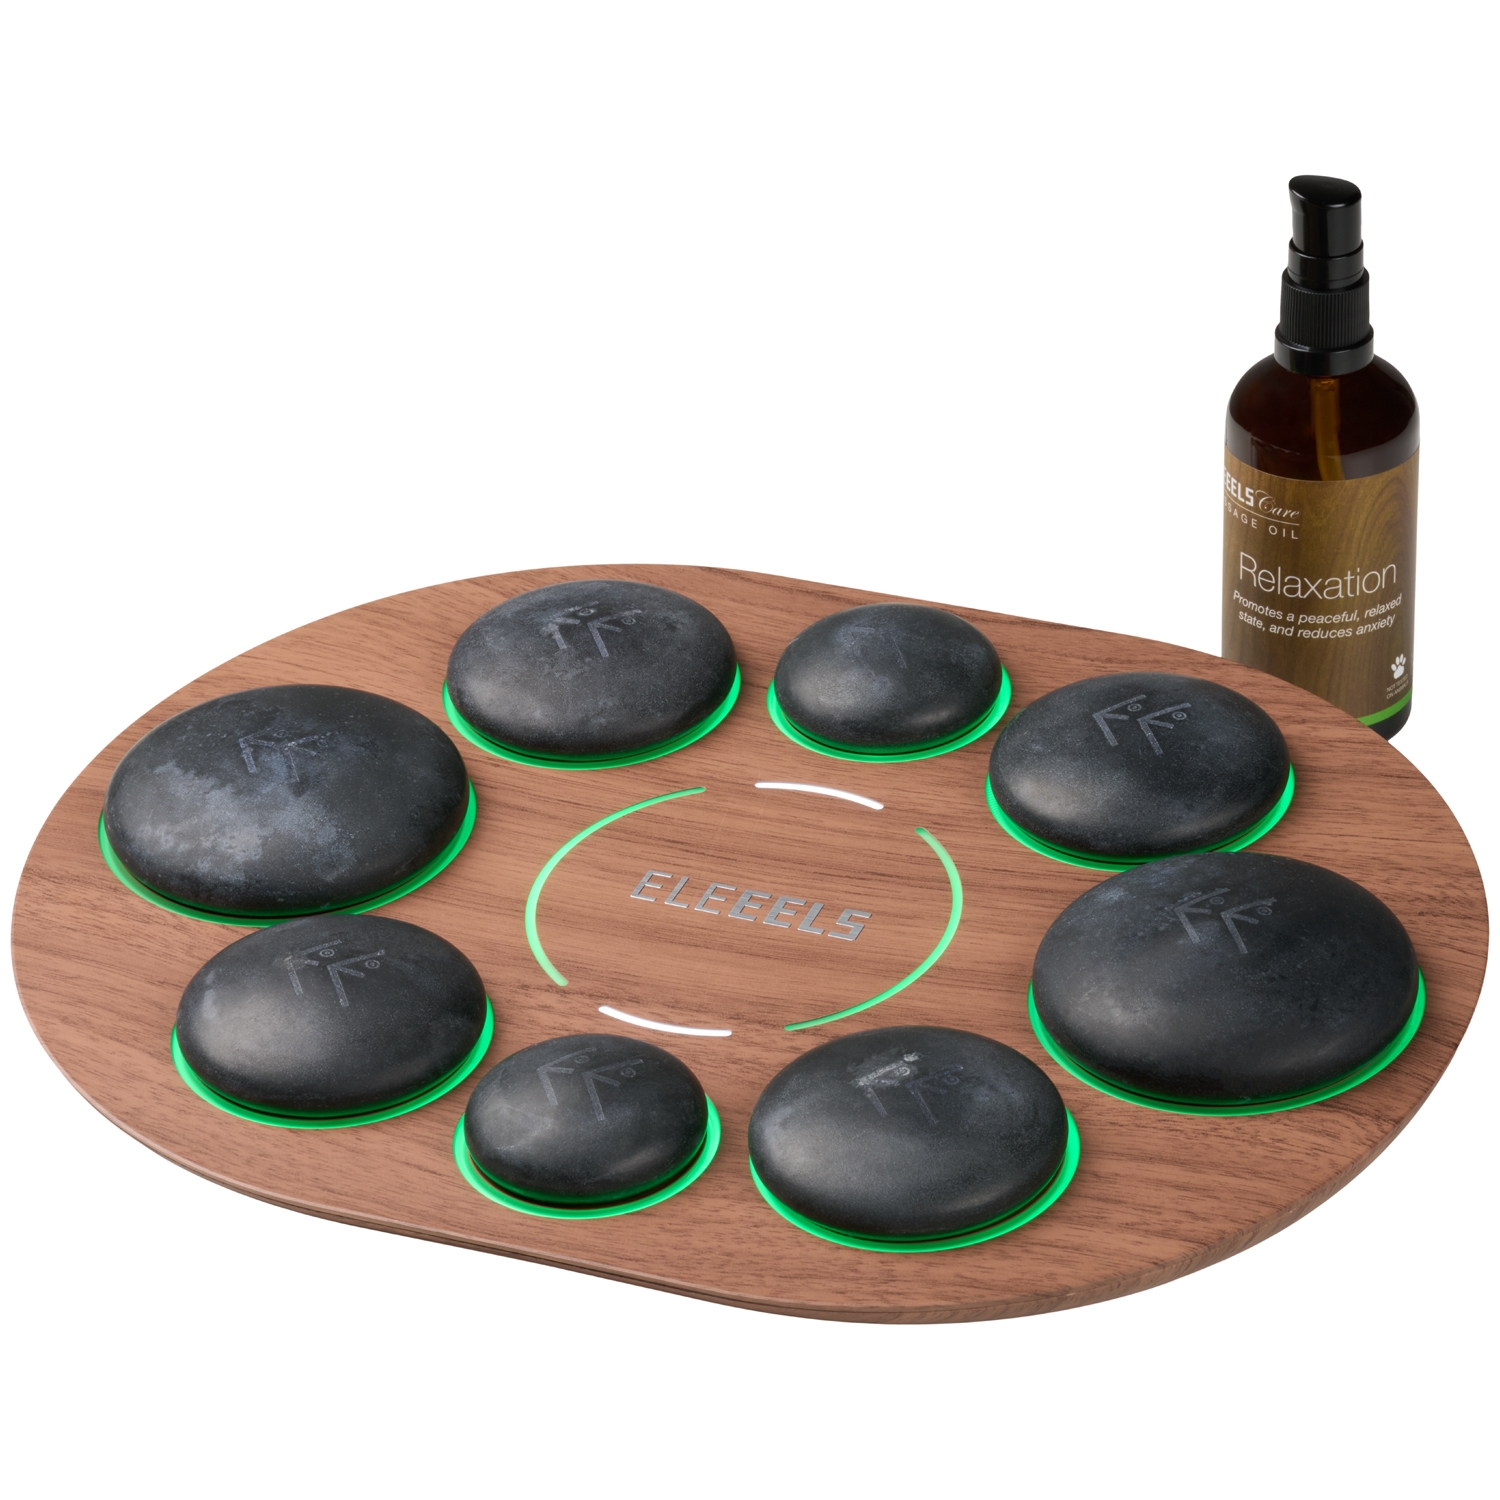 Eleeels S1 Revival Hot Stone Spa Collection    - Sort